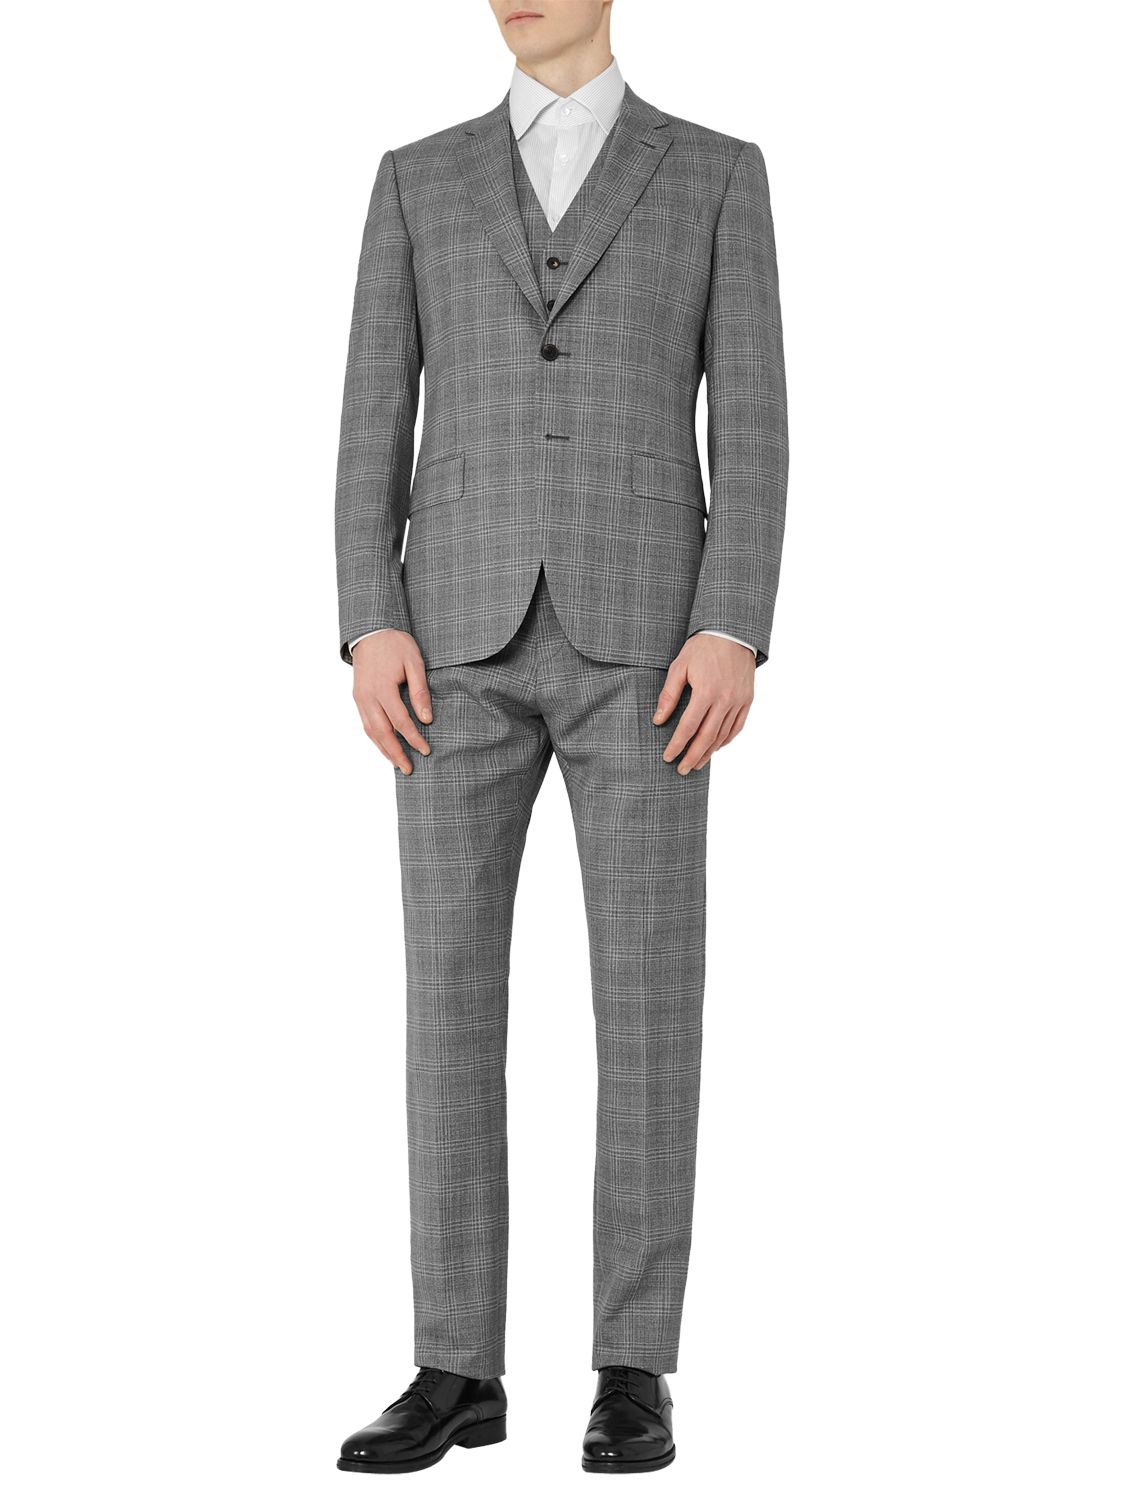 Reiss Crow Check Classic Fit Three Piece Suit, Grey